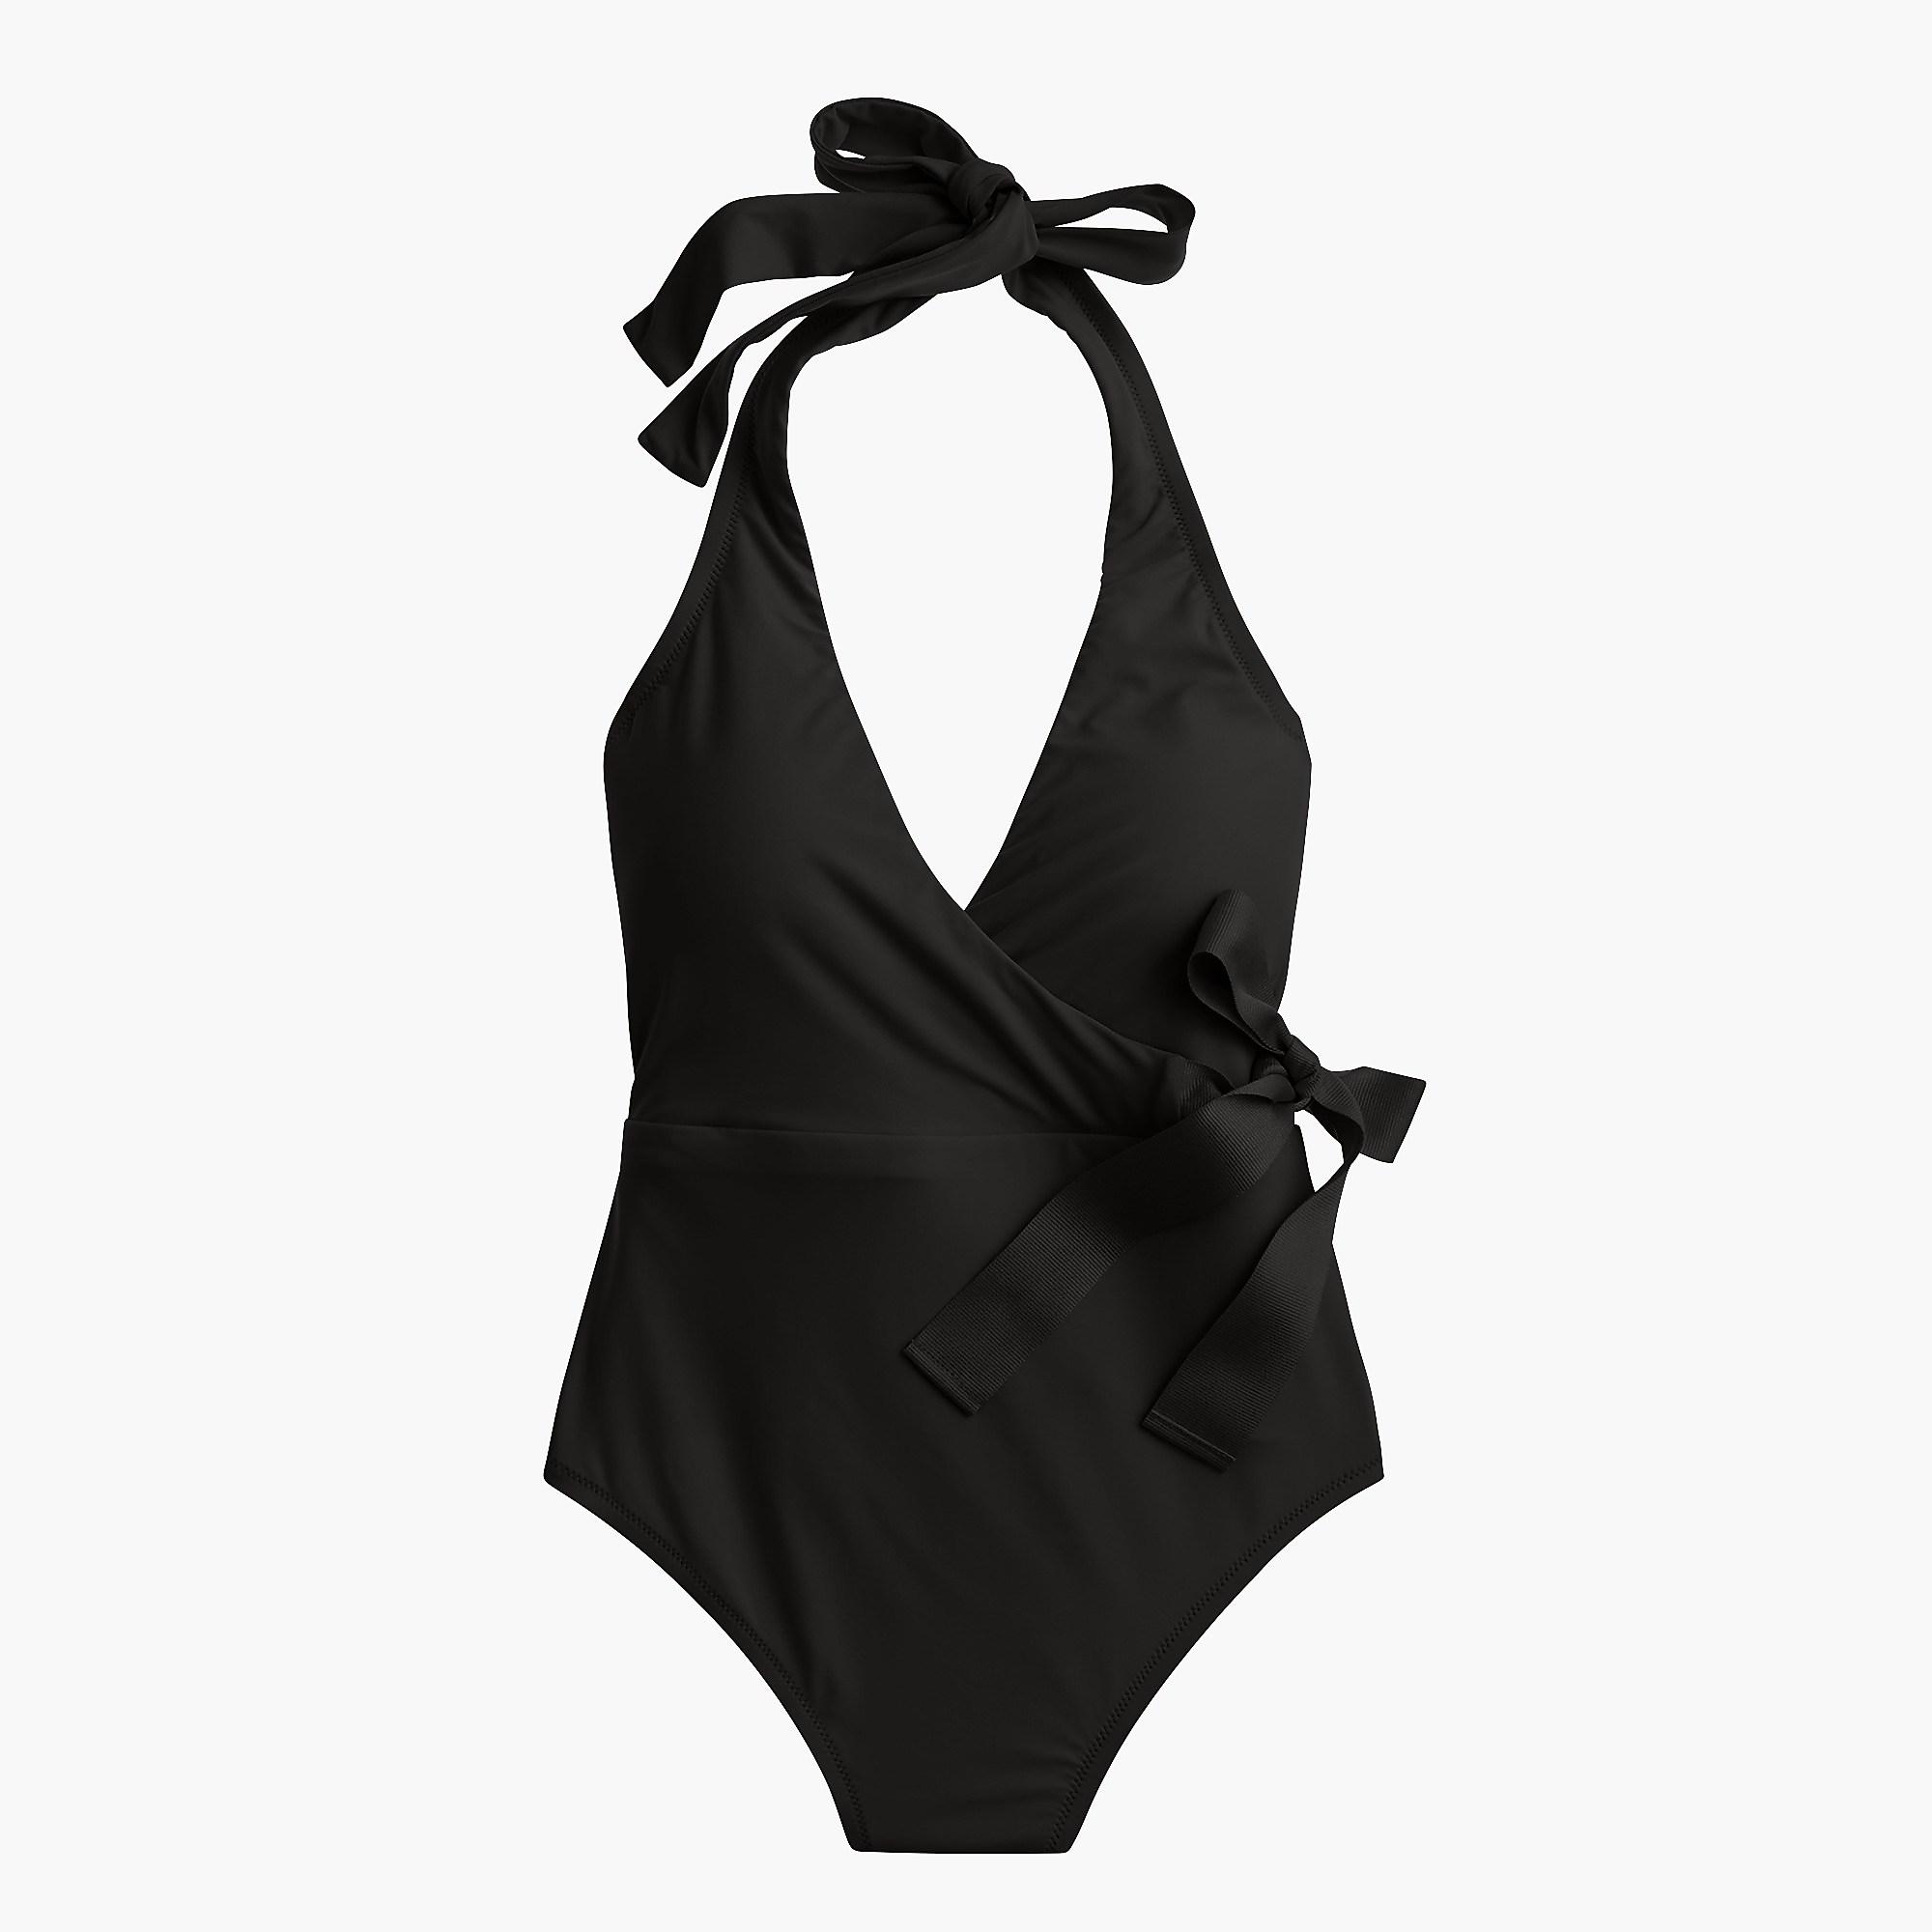 J.Crew Synthetic Halter Wrap One-piece Swimsuit in Black - Lyst